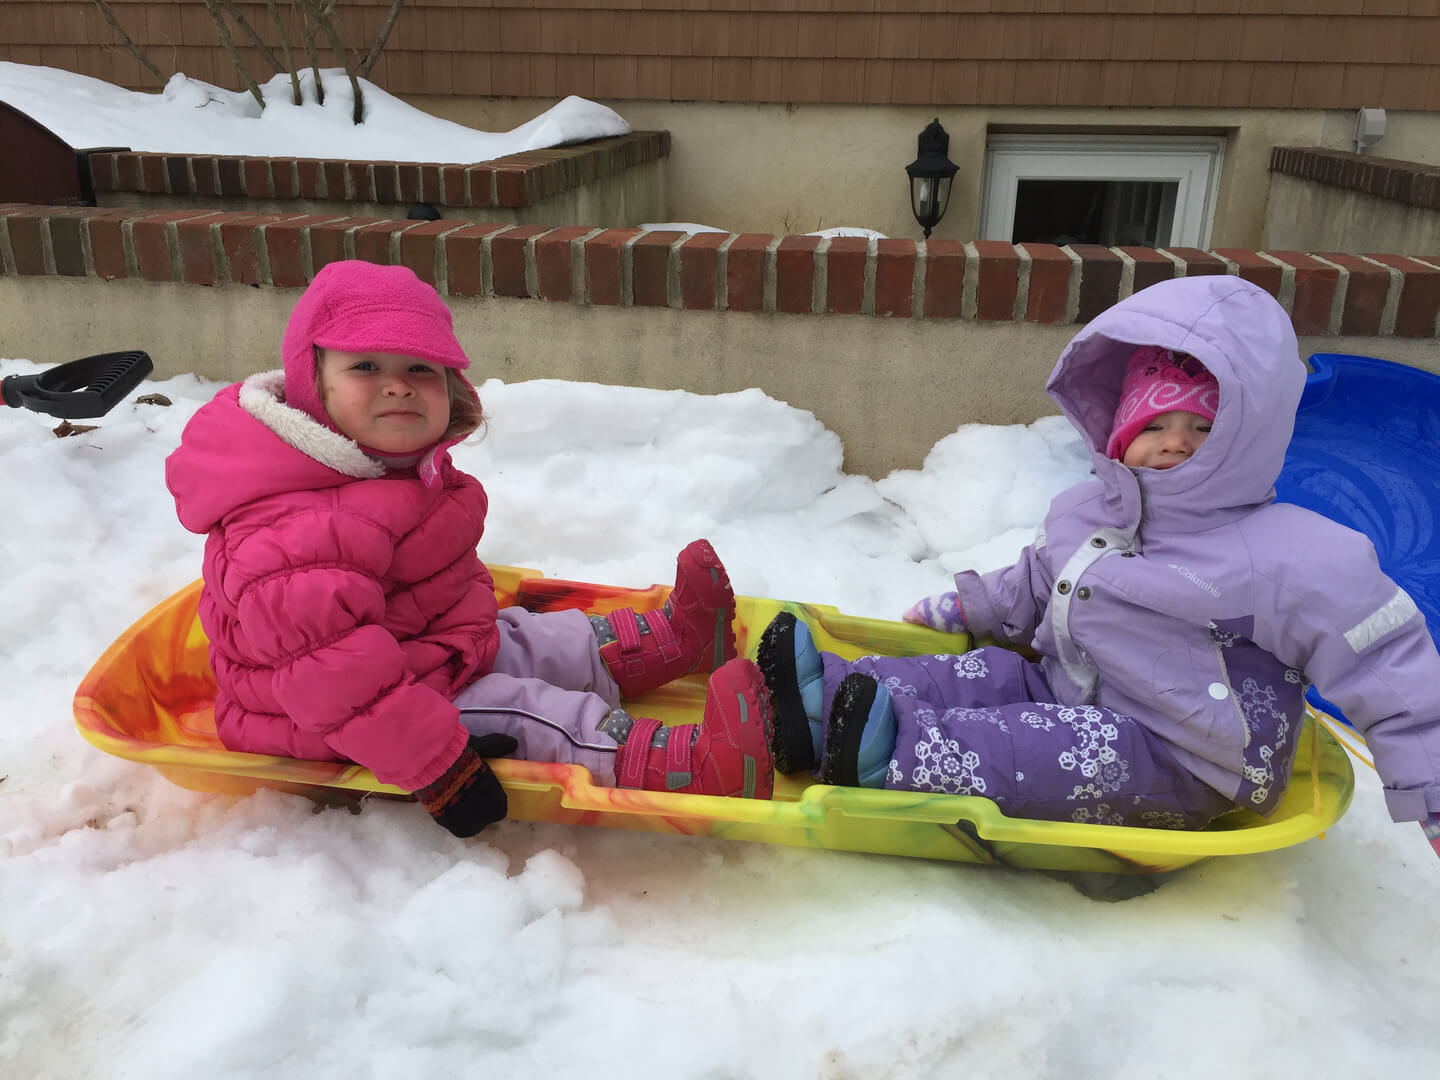 Two toddlers playing in the snow